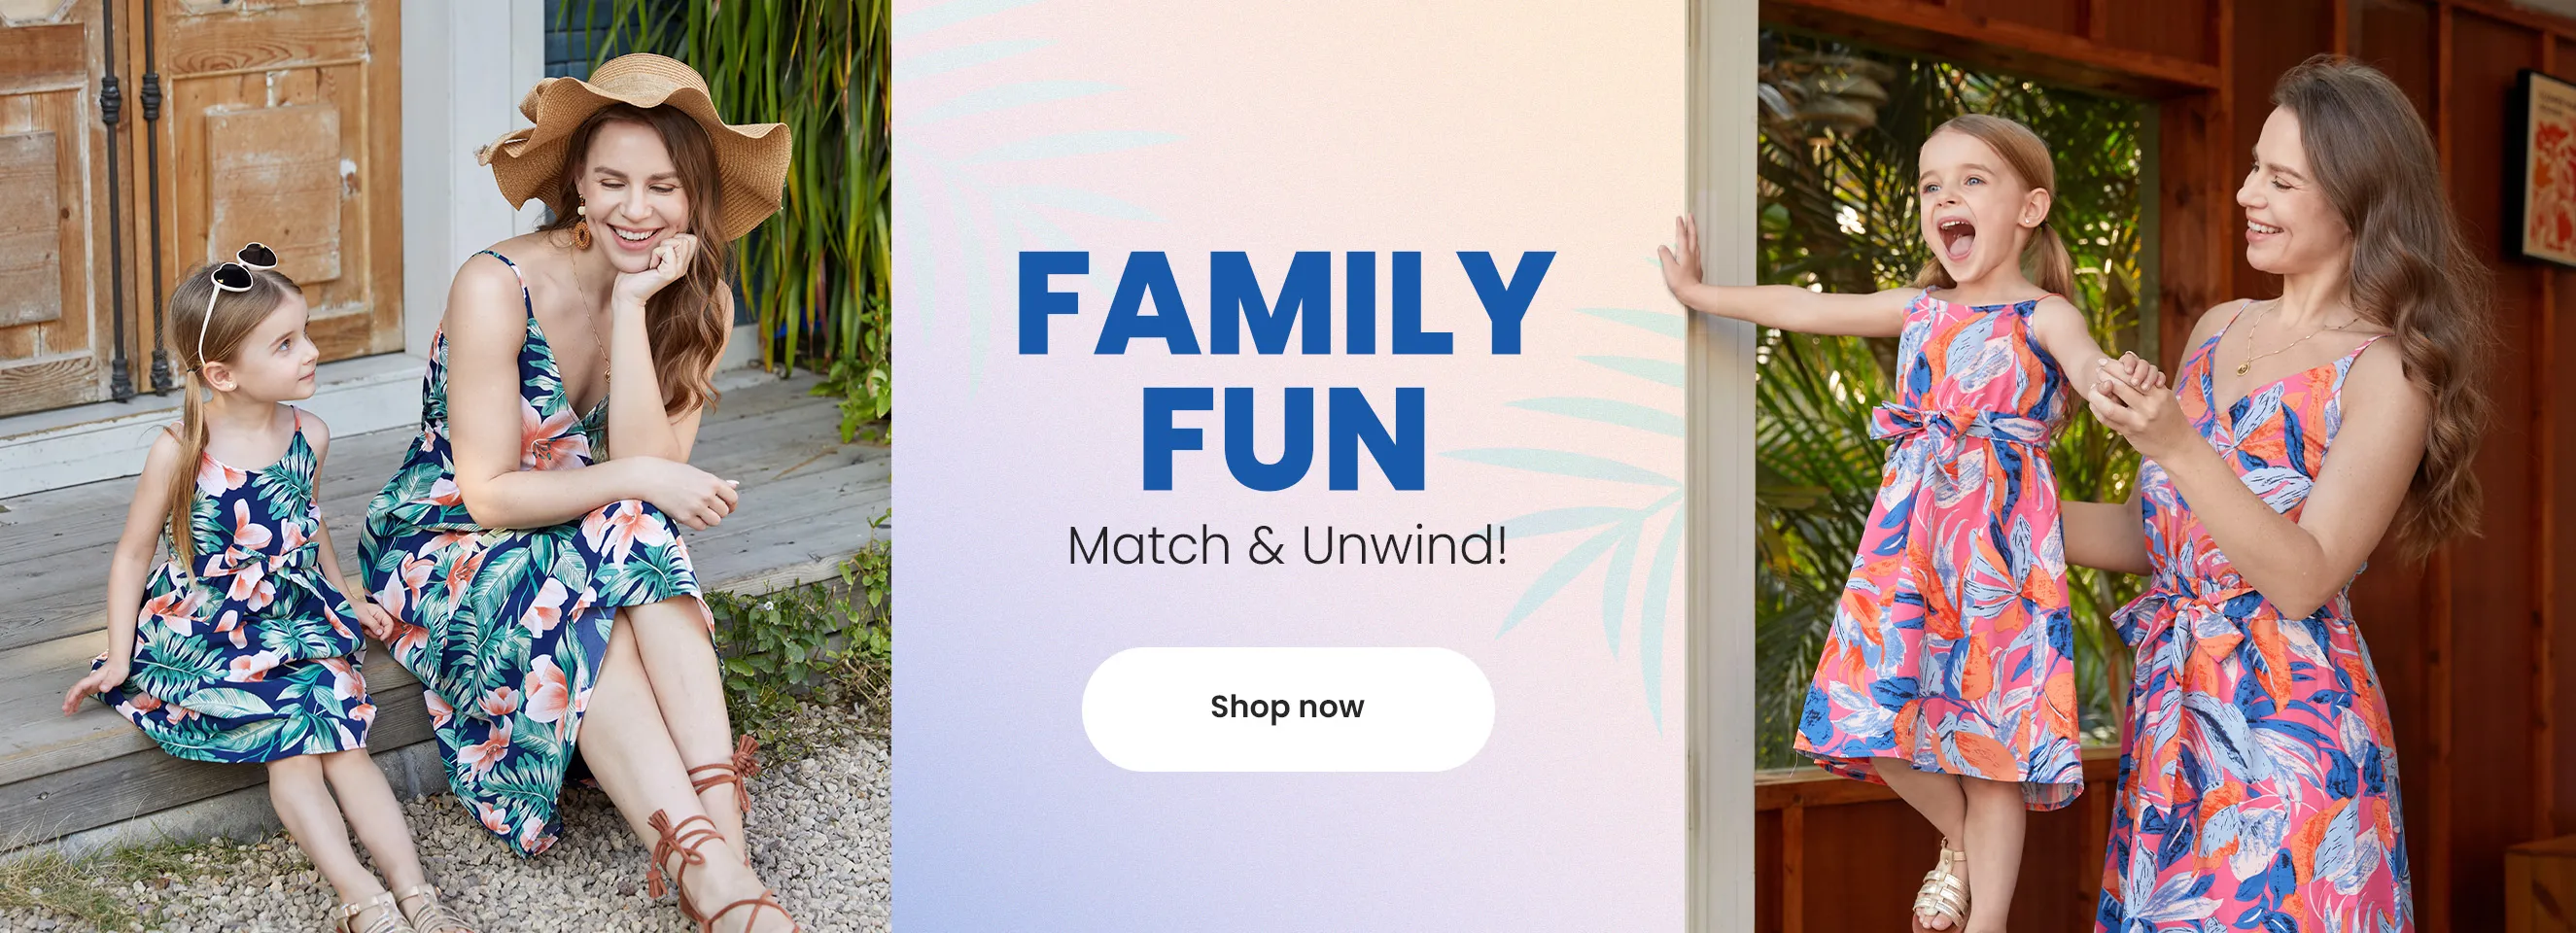 Click it to join Family Fun activity